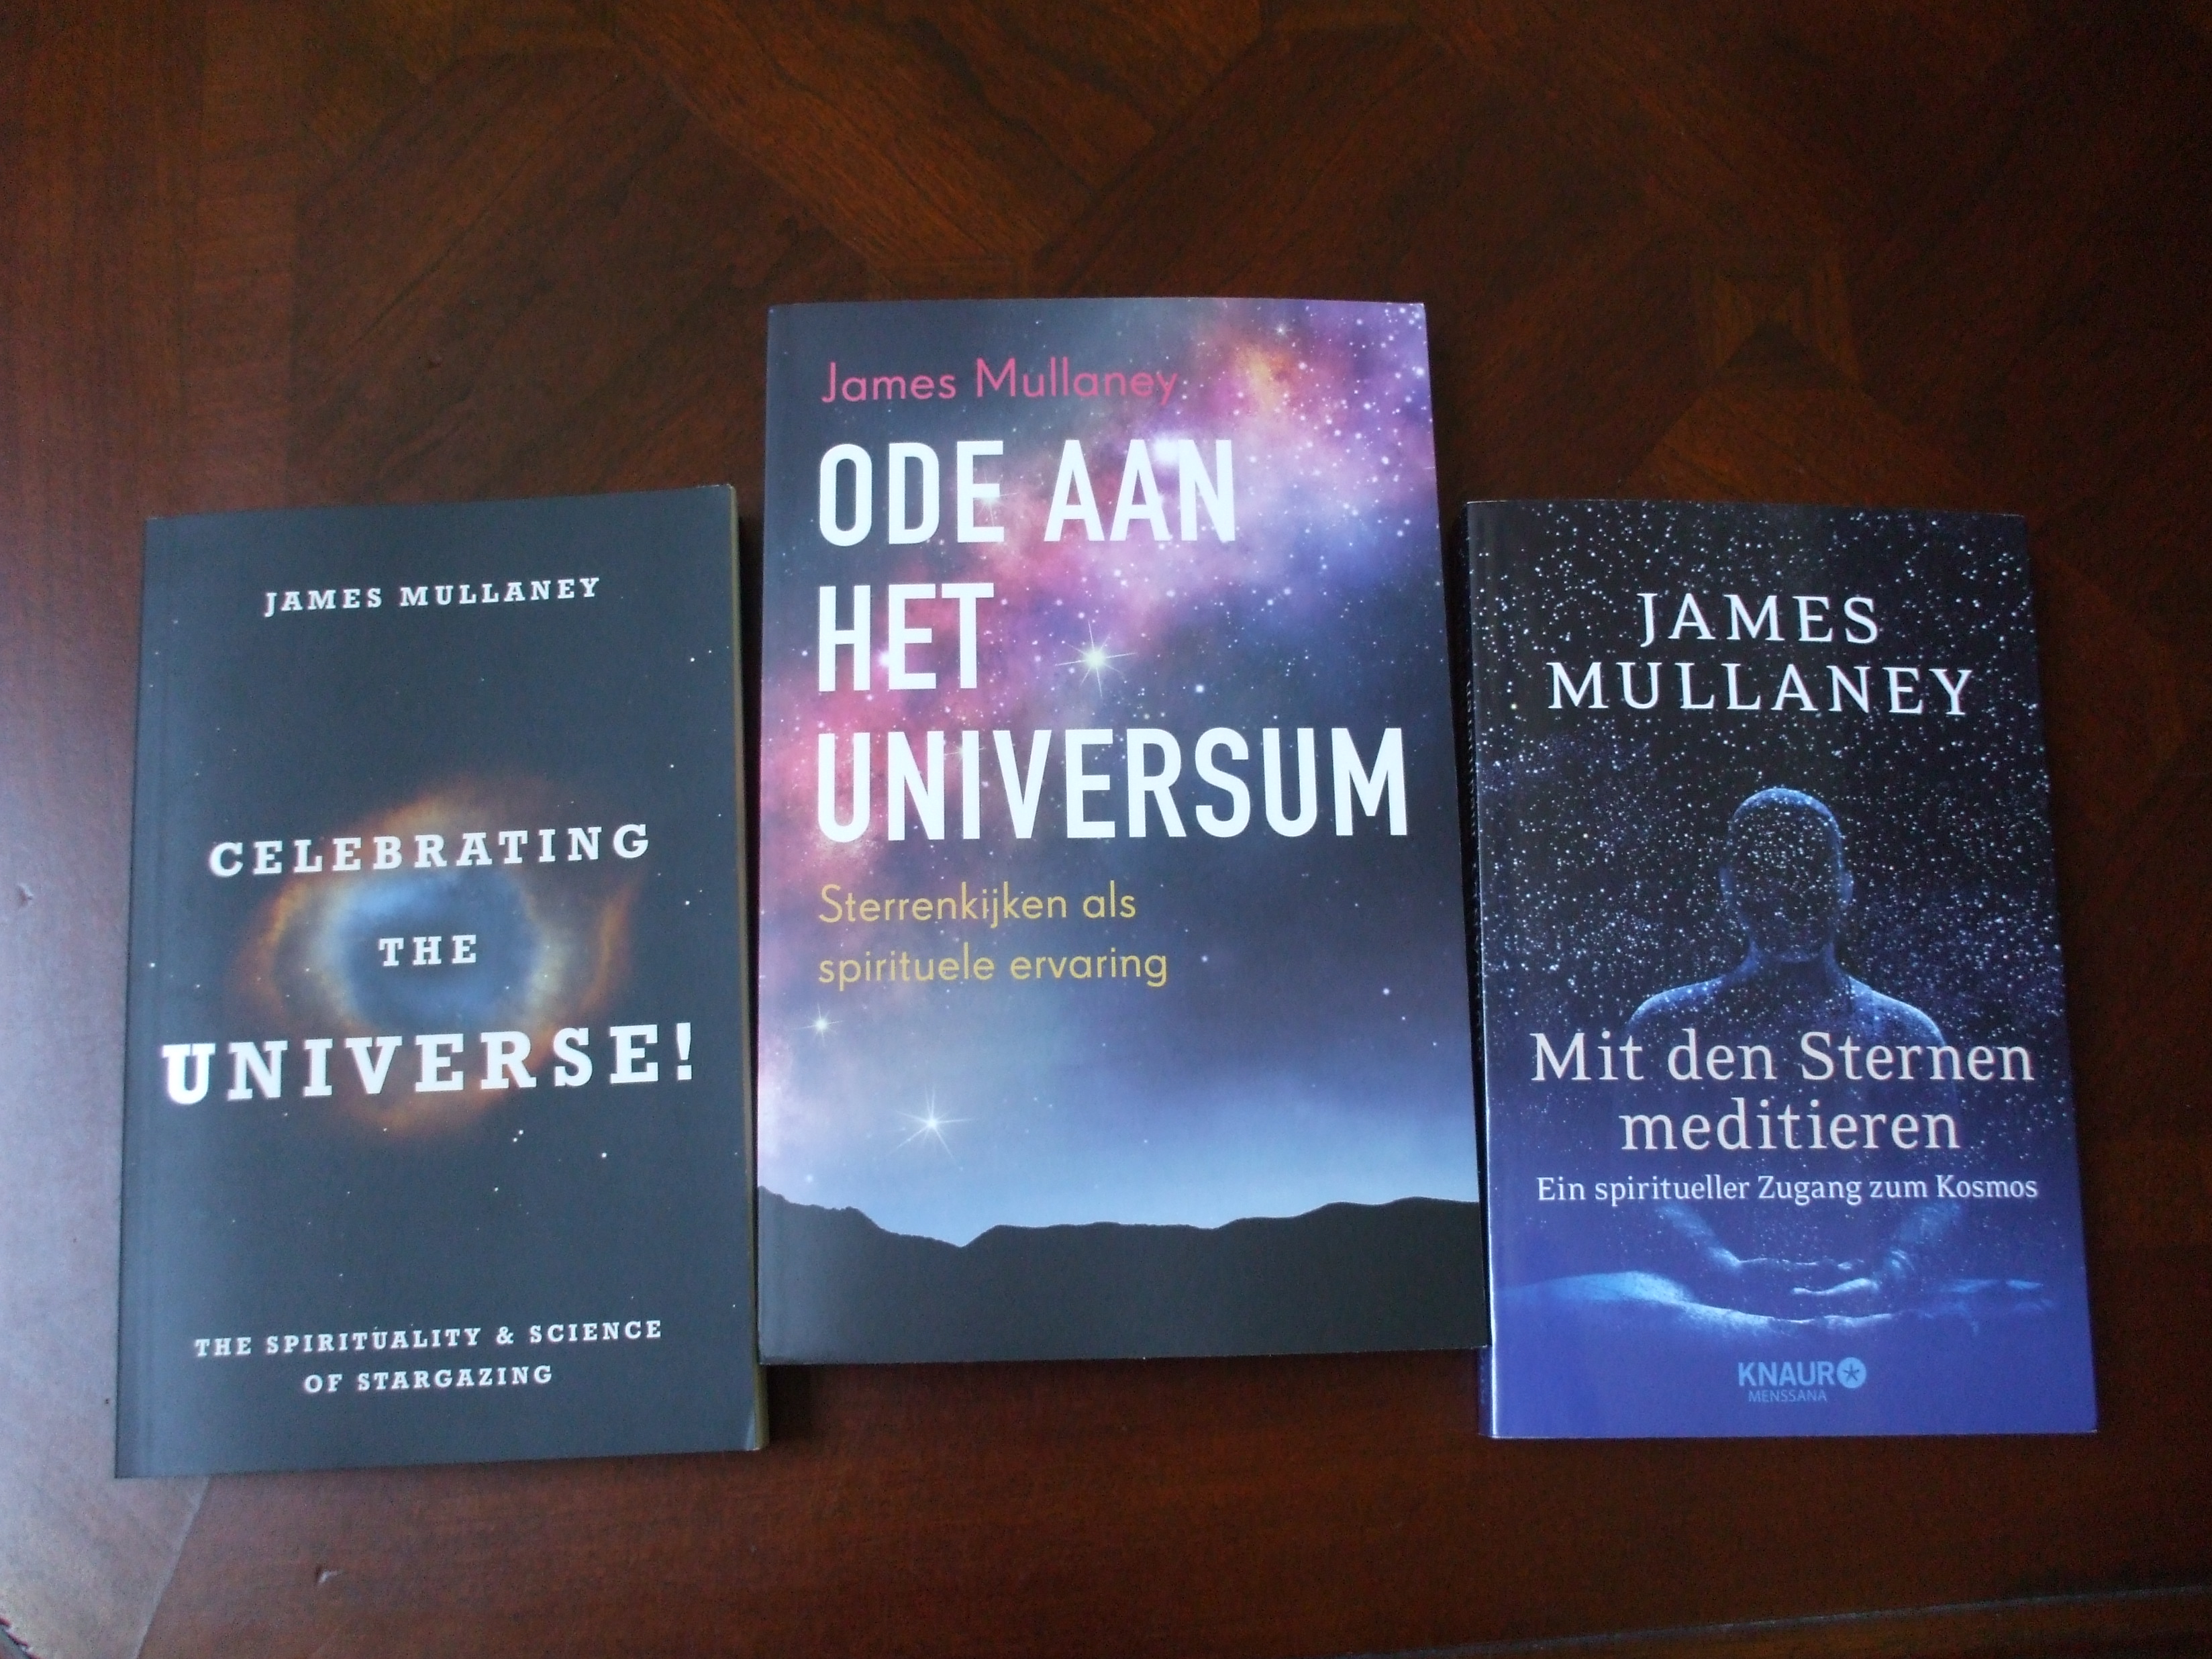 James Mullaney 'Celebrating the Universe!' book in English, Dutch, and German